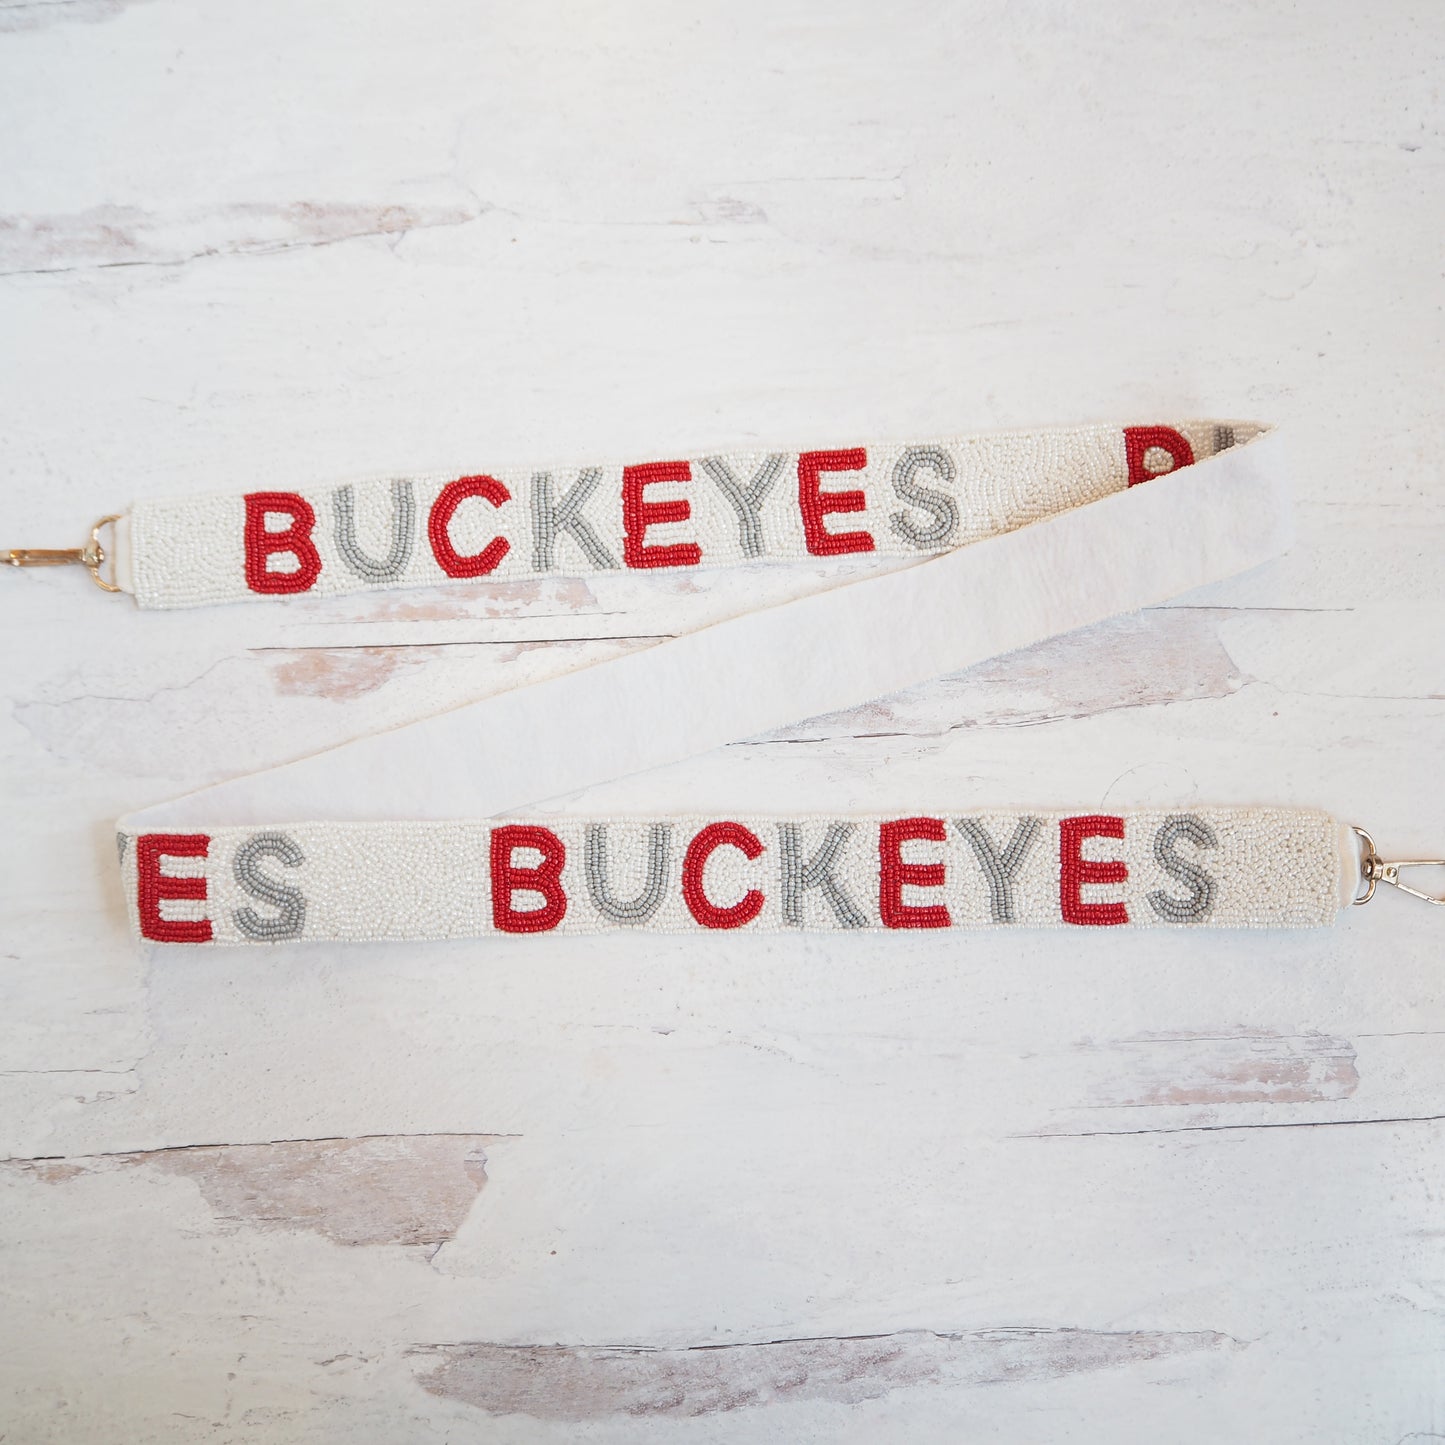  Lashicorn Ohio Beaded Purse Strap for College Football Fans   1.5” x 49” Buckeye Red, Gray, and White to Attach to Clear Stadium Purse  State Football Team : Sports & Outdoors